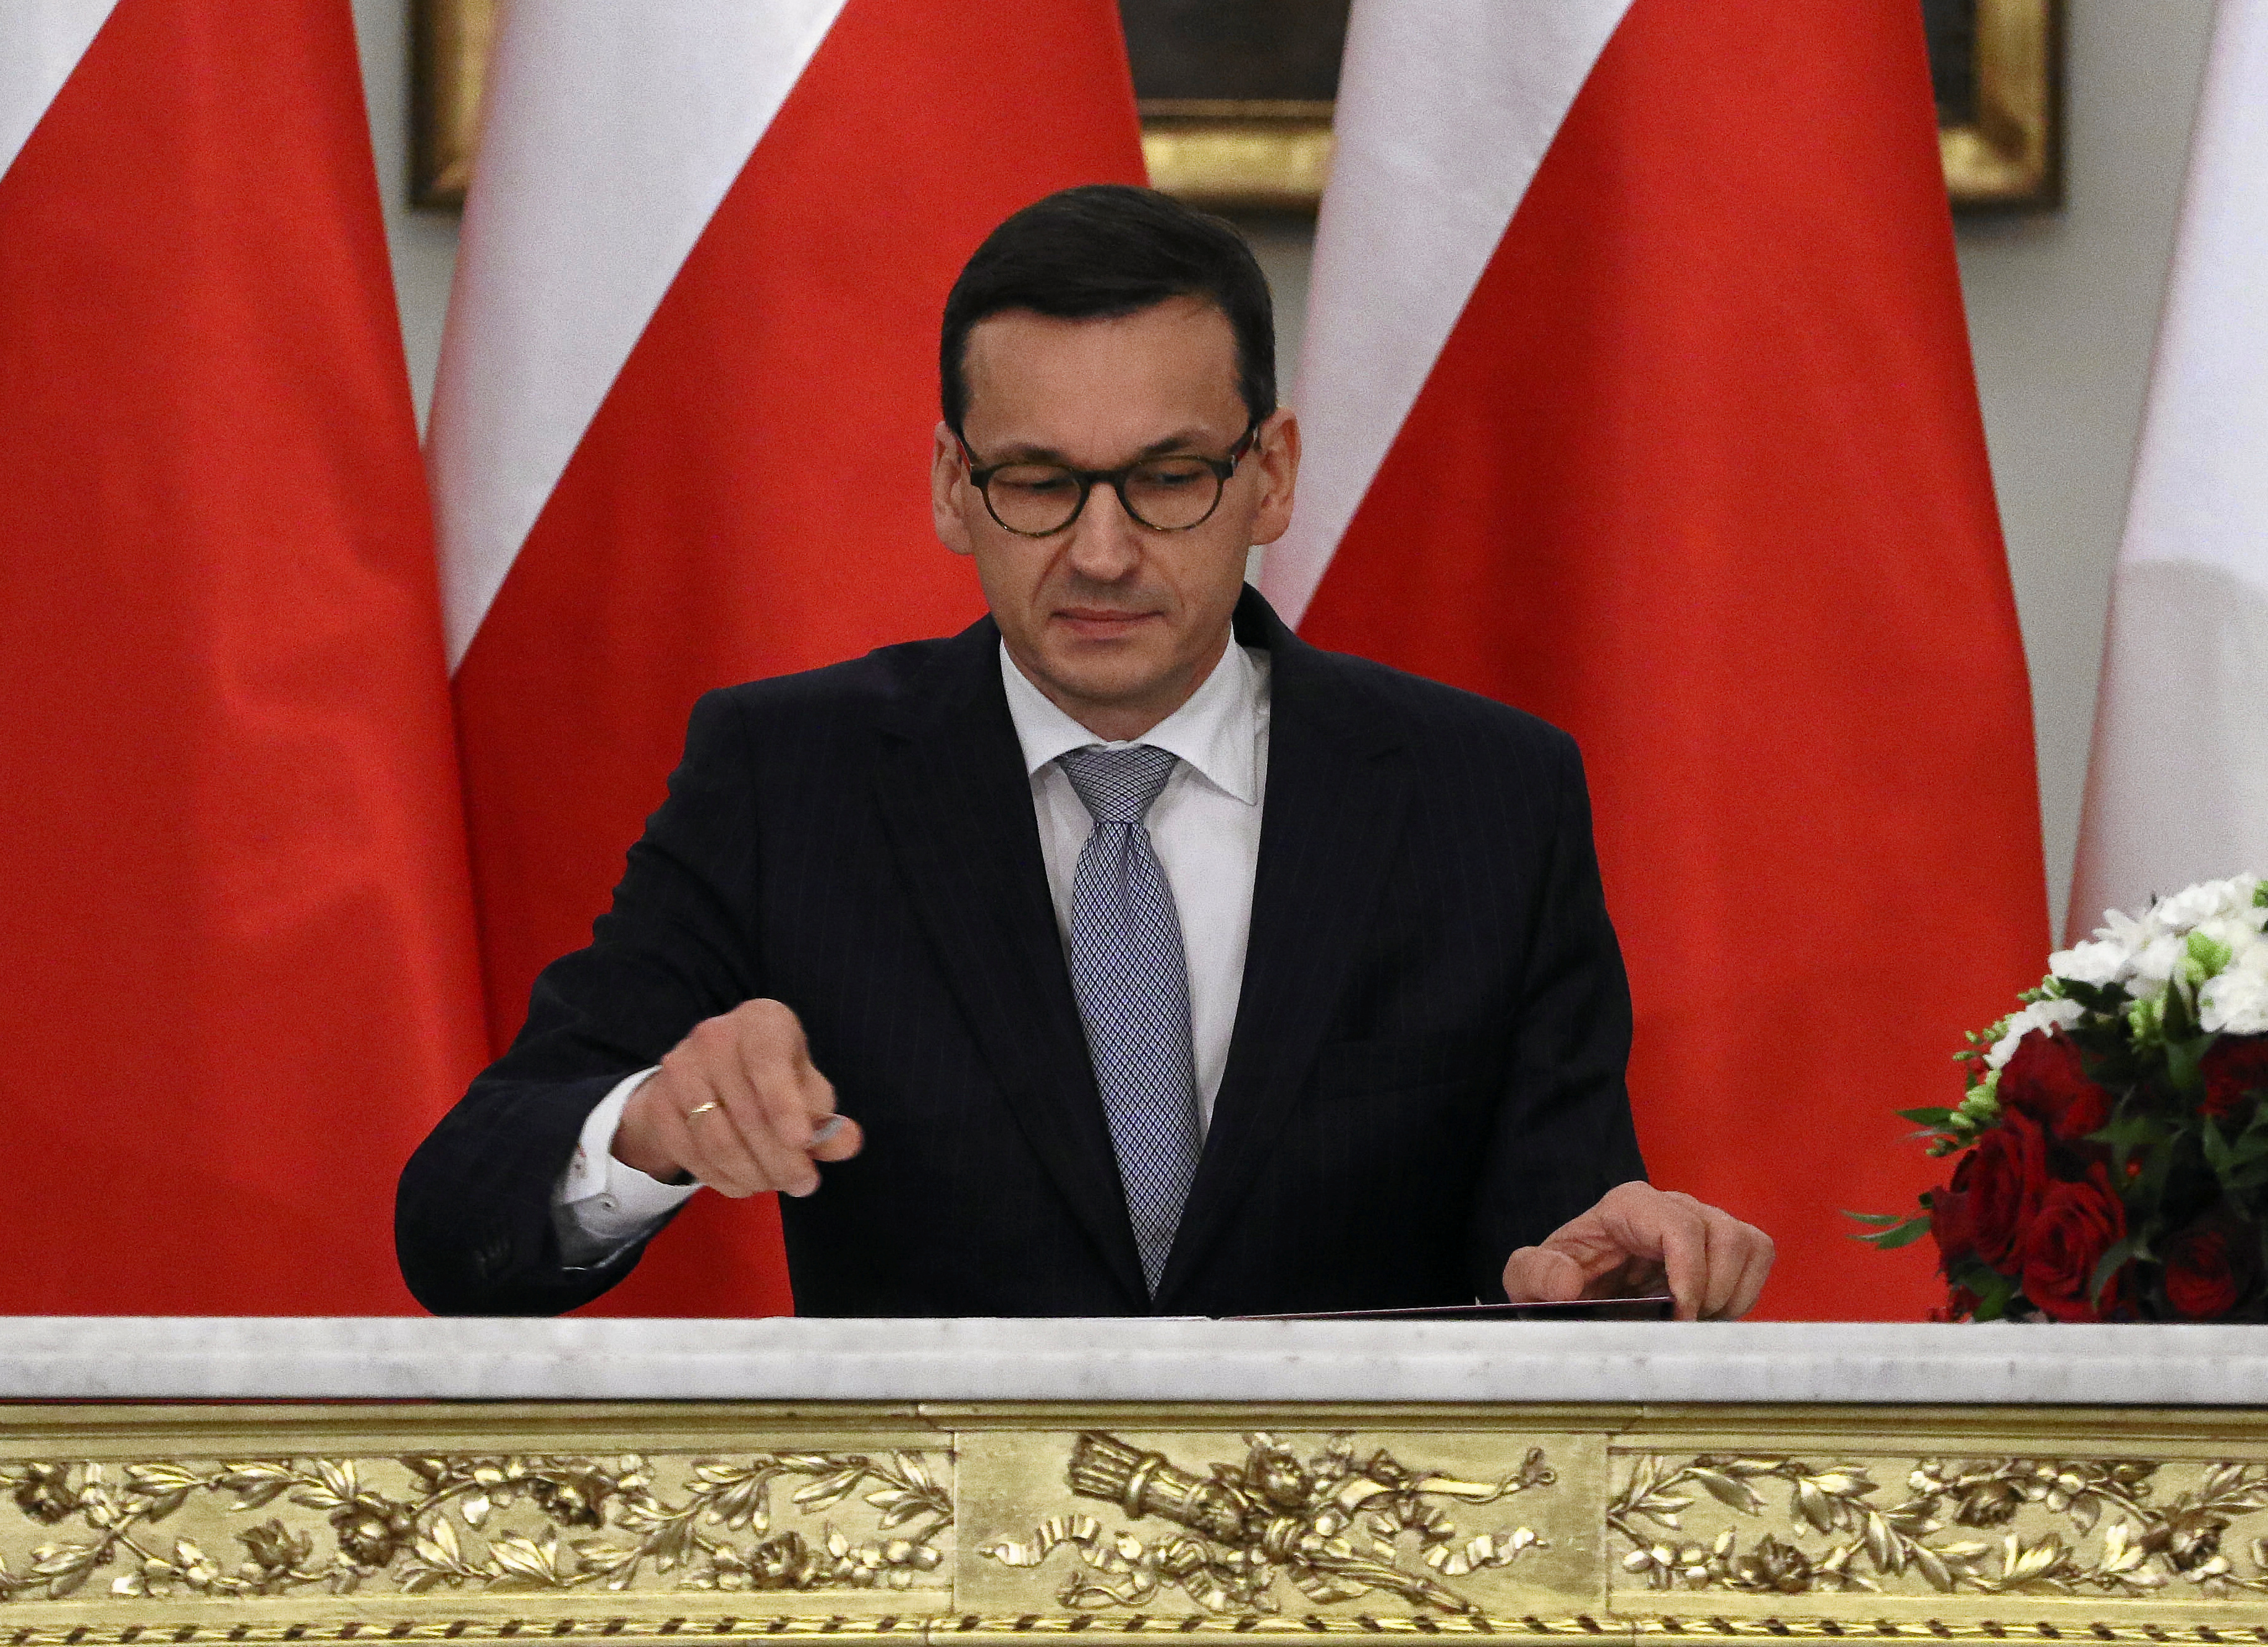 Newly appointed Polish Prime Minister Morawiecki reacts after receiving his nomination from President Duda during a government swearing-in ceremony in Warsaw